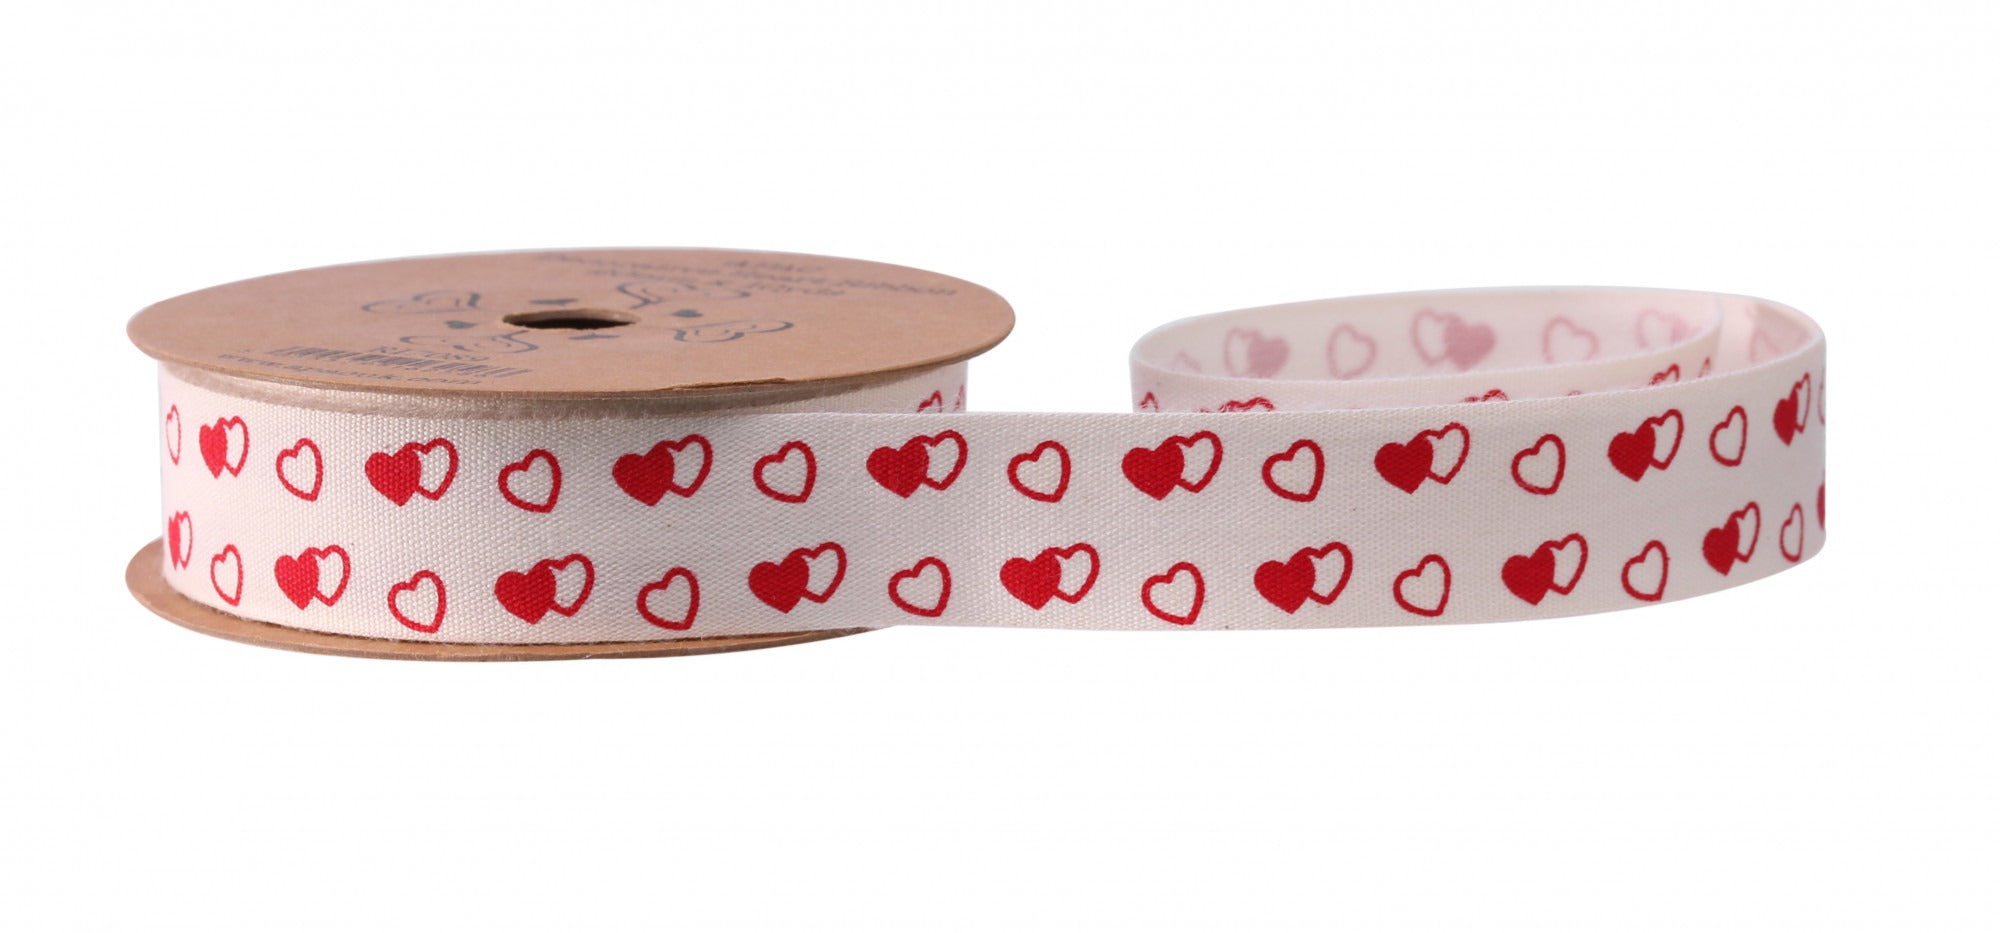 View White with Red White Hearts Ribbon 20mm x10yds information